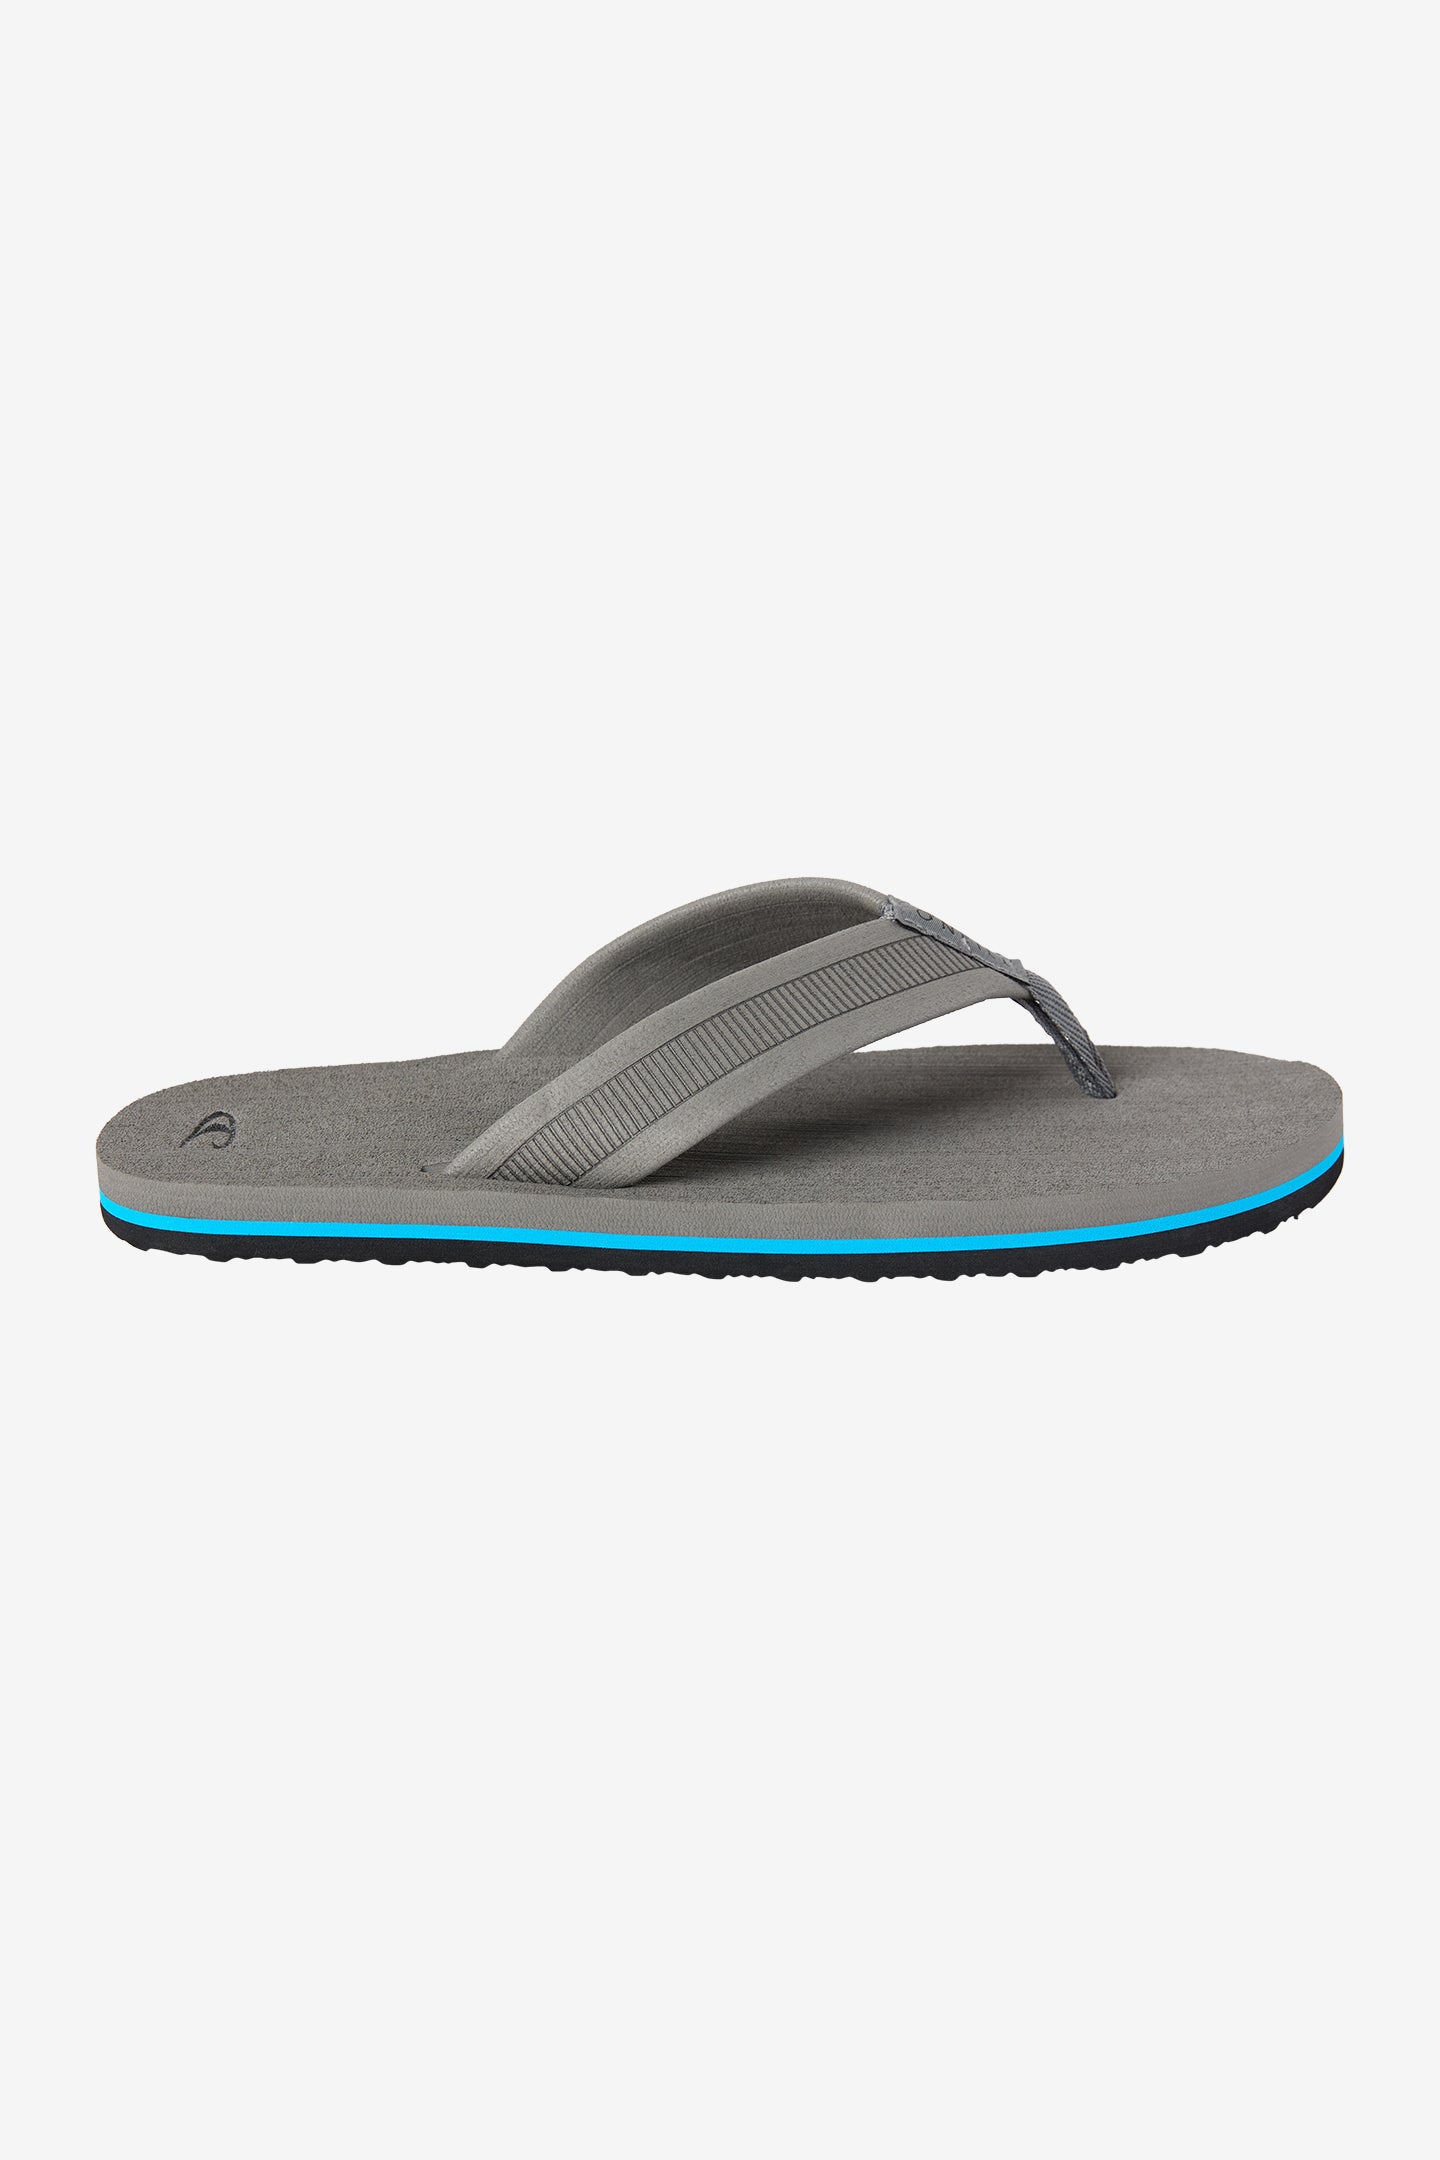 Expedition Sandals - Grey | O'Neill